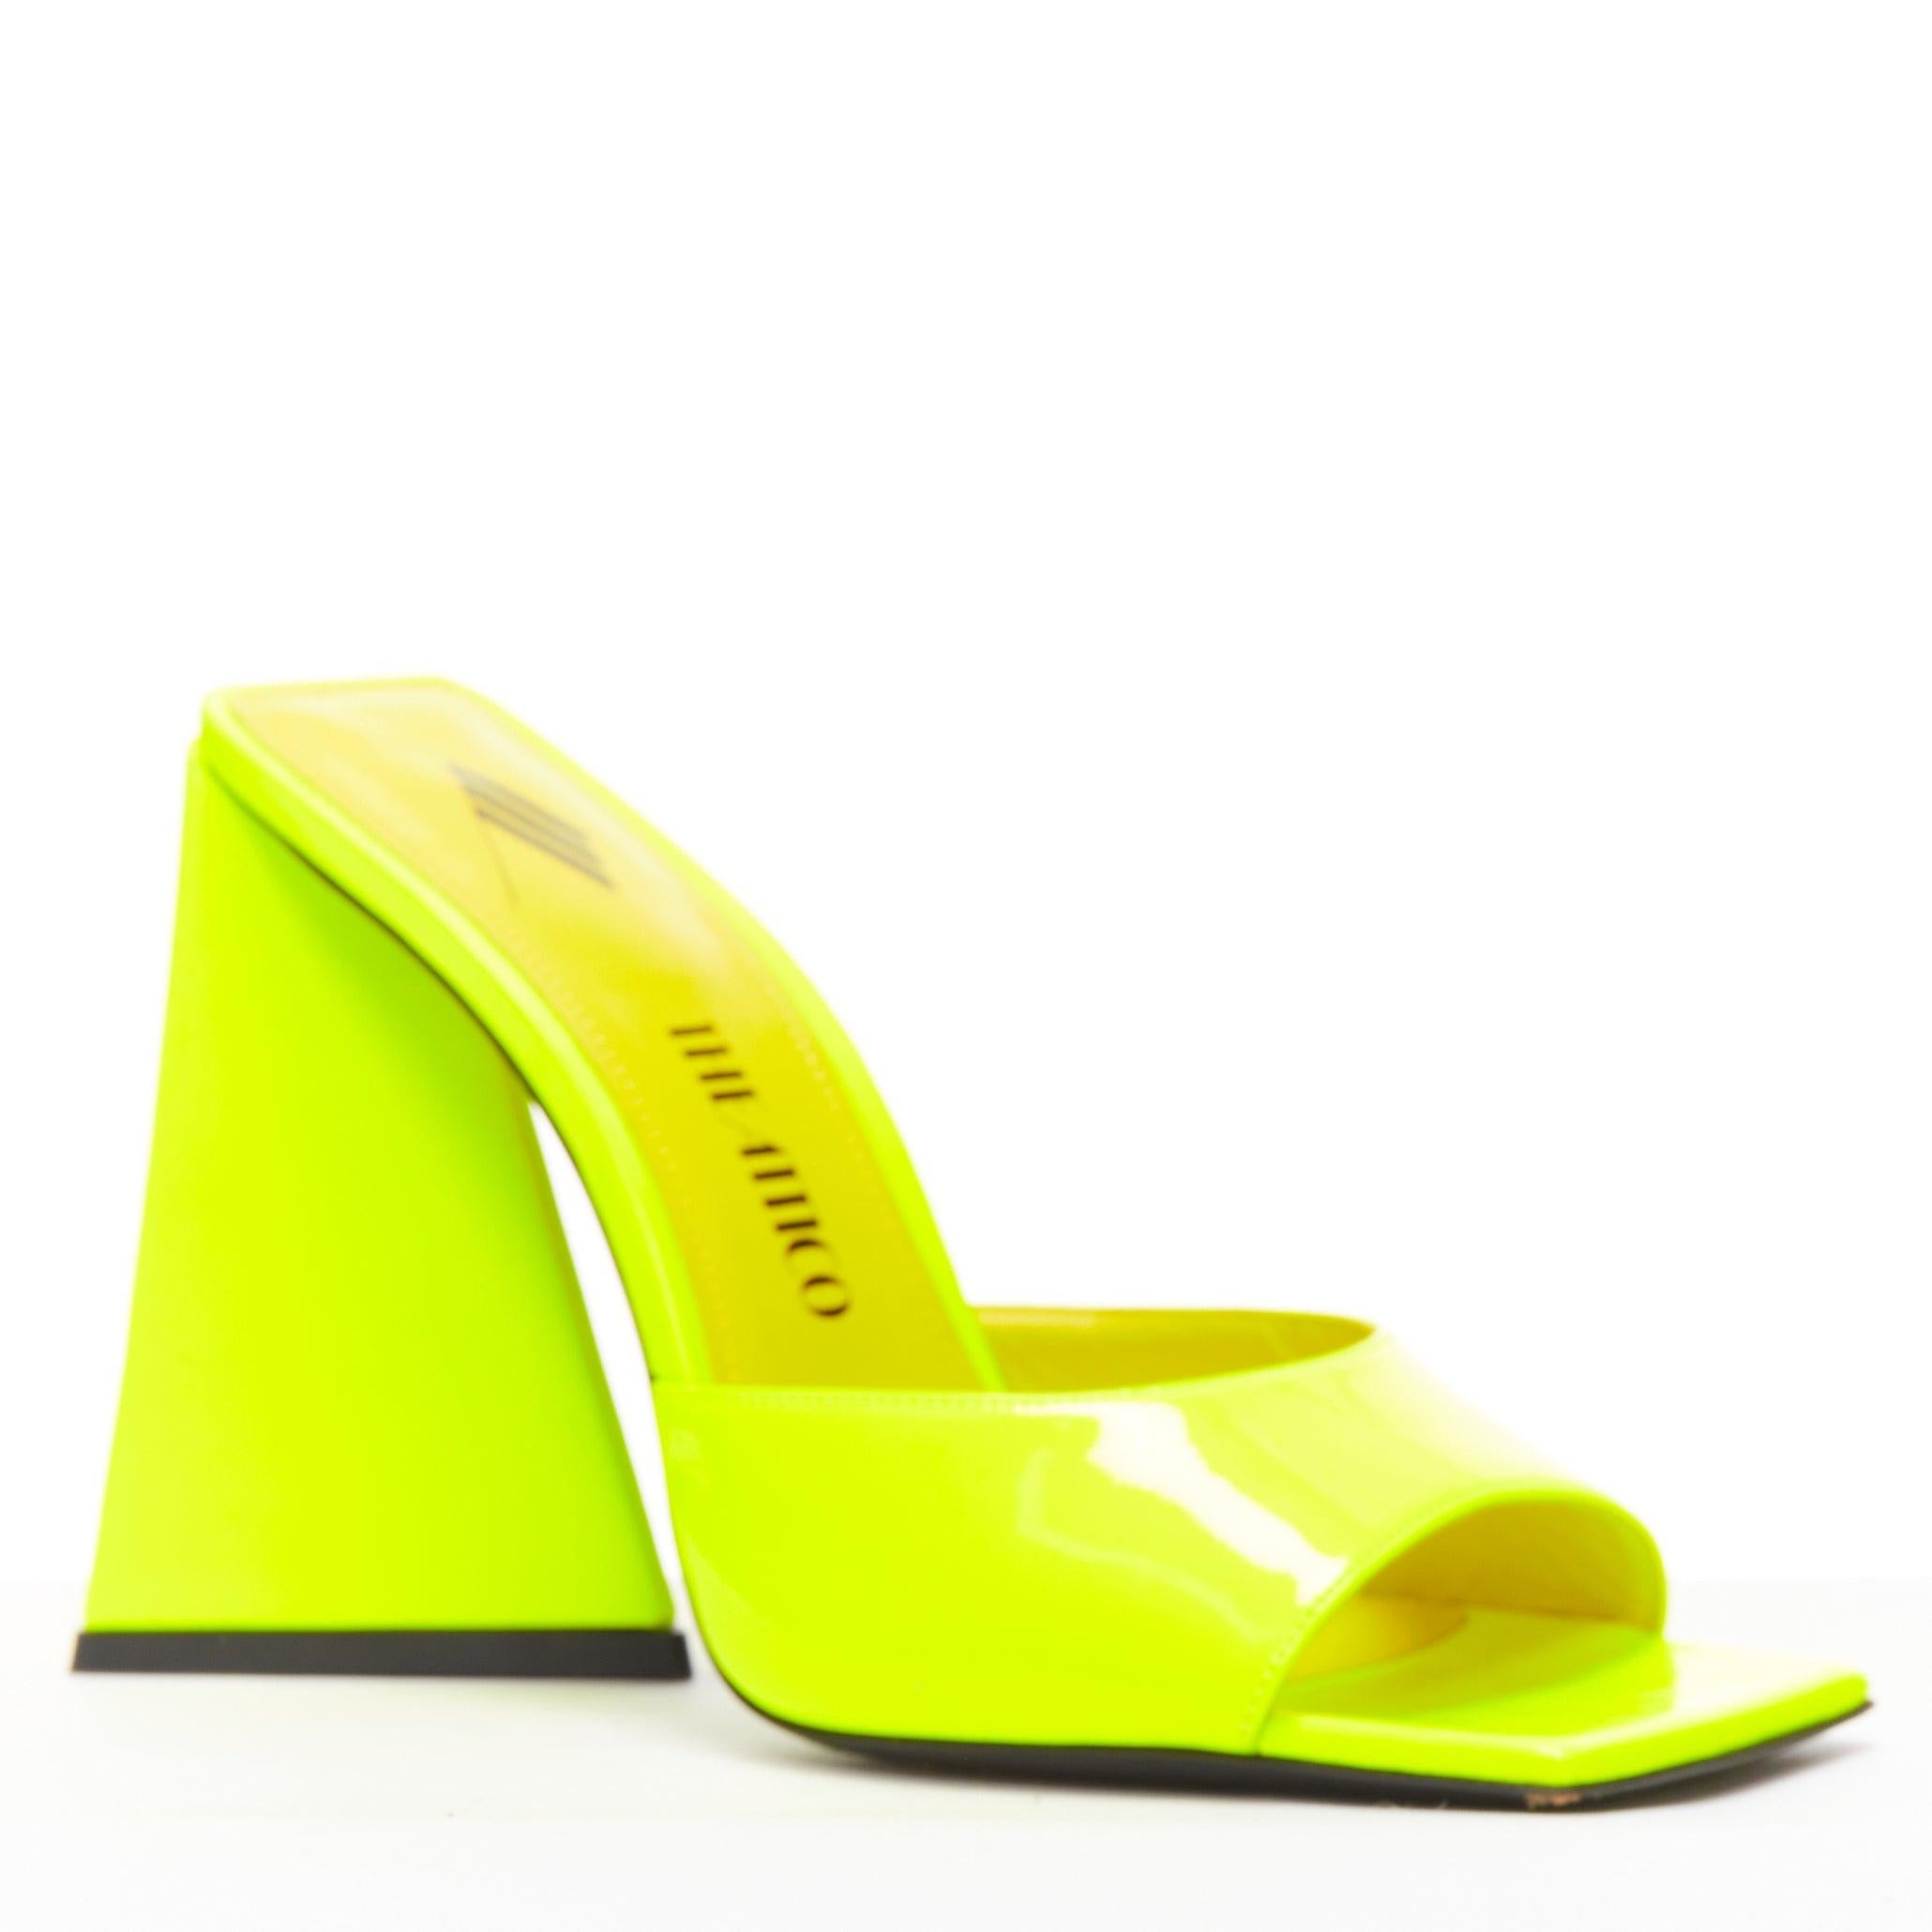 THE ATTICO Devon neon yellow leather open square toe mules heels EU37.5
Reference: LNKO/A02298
Brand: The Attico
Model: Devon
Material: Leather
Color: Neon Yellow
Pattern: Solid
Closure: Slip On
Lining: Yellow Leather
Extra Details: Architectural